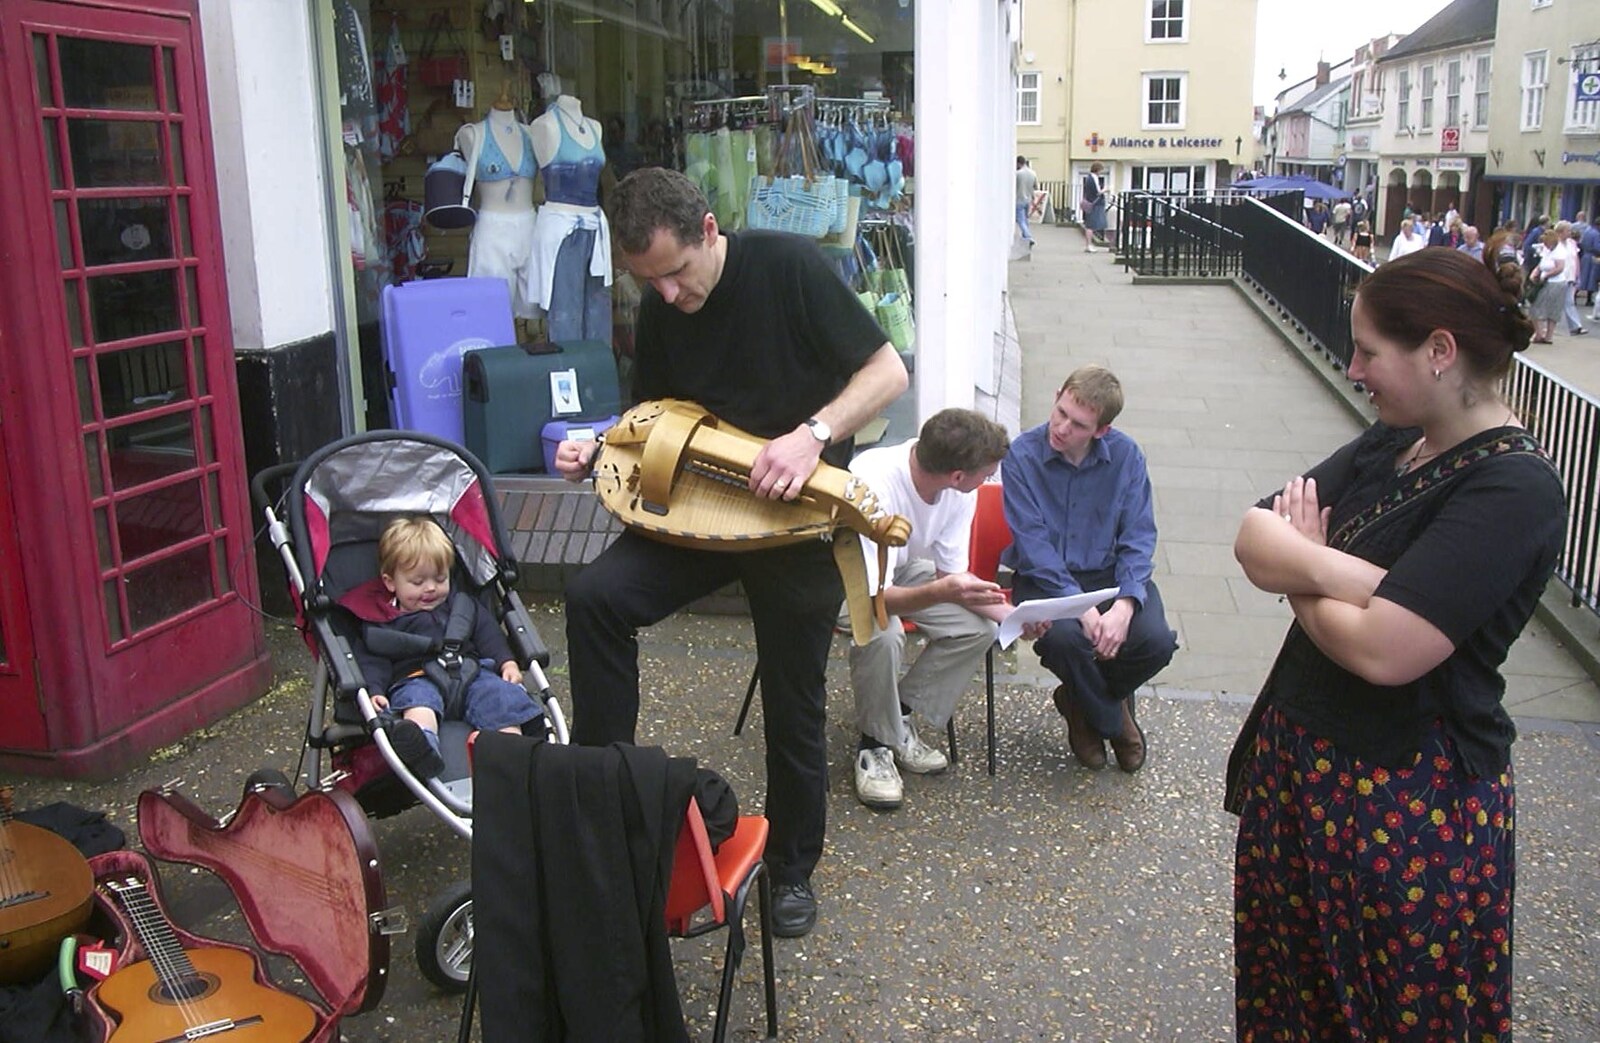 The hurdy-gurdy man has a spin from Andrey Leaves Trigenix, More Skelton Festival and a Transit of Venus, Cambridge and Diss - 4th June 2004